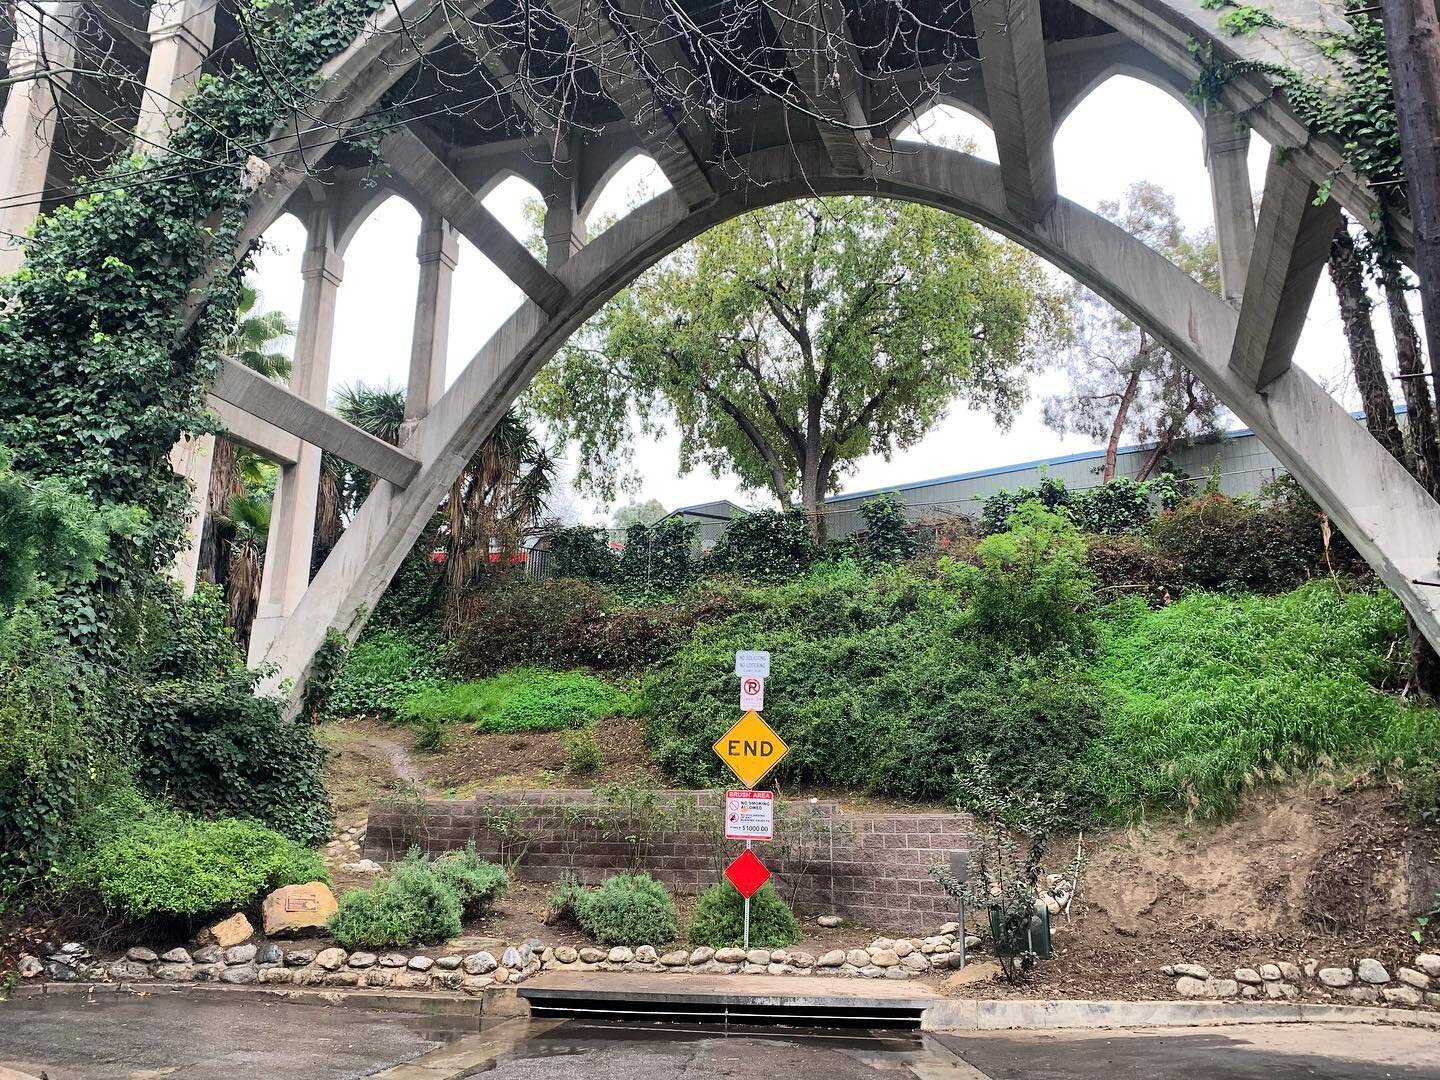 Extending a huge Thank You to the LA Conservation Corp and CD4 for coordinating with the FHRA to clean up the Shakespeare Bridge Garden. Thanks to all of your hard work the garden looks beautiful! #communityfirst #fhra #franklinhills #losfeliz #Shake